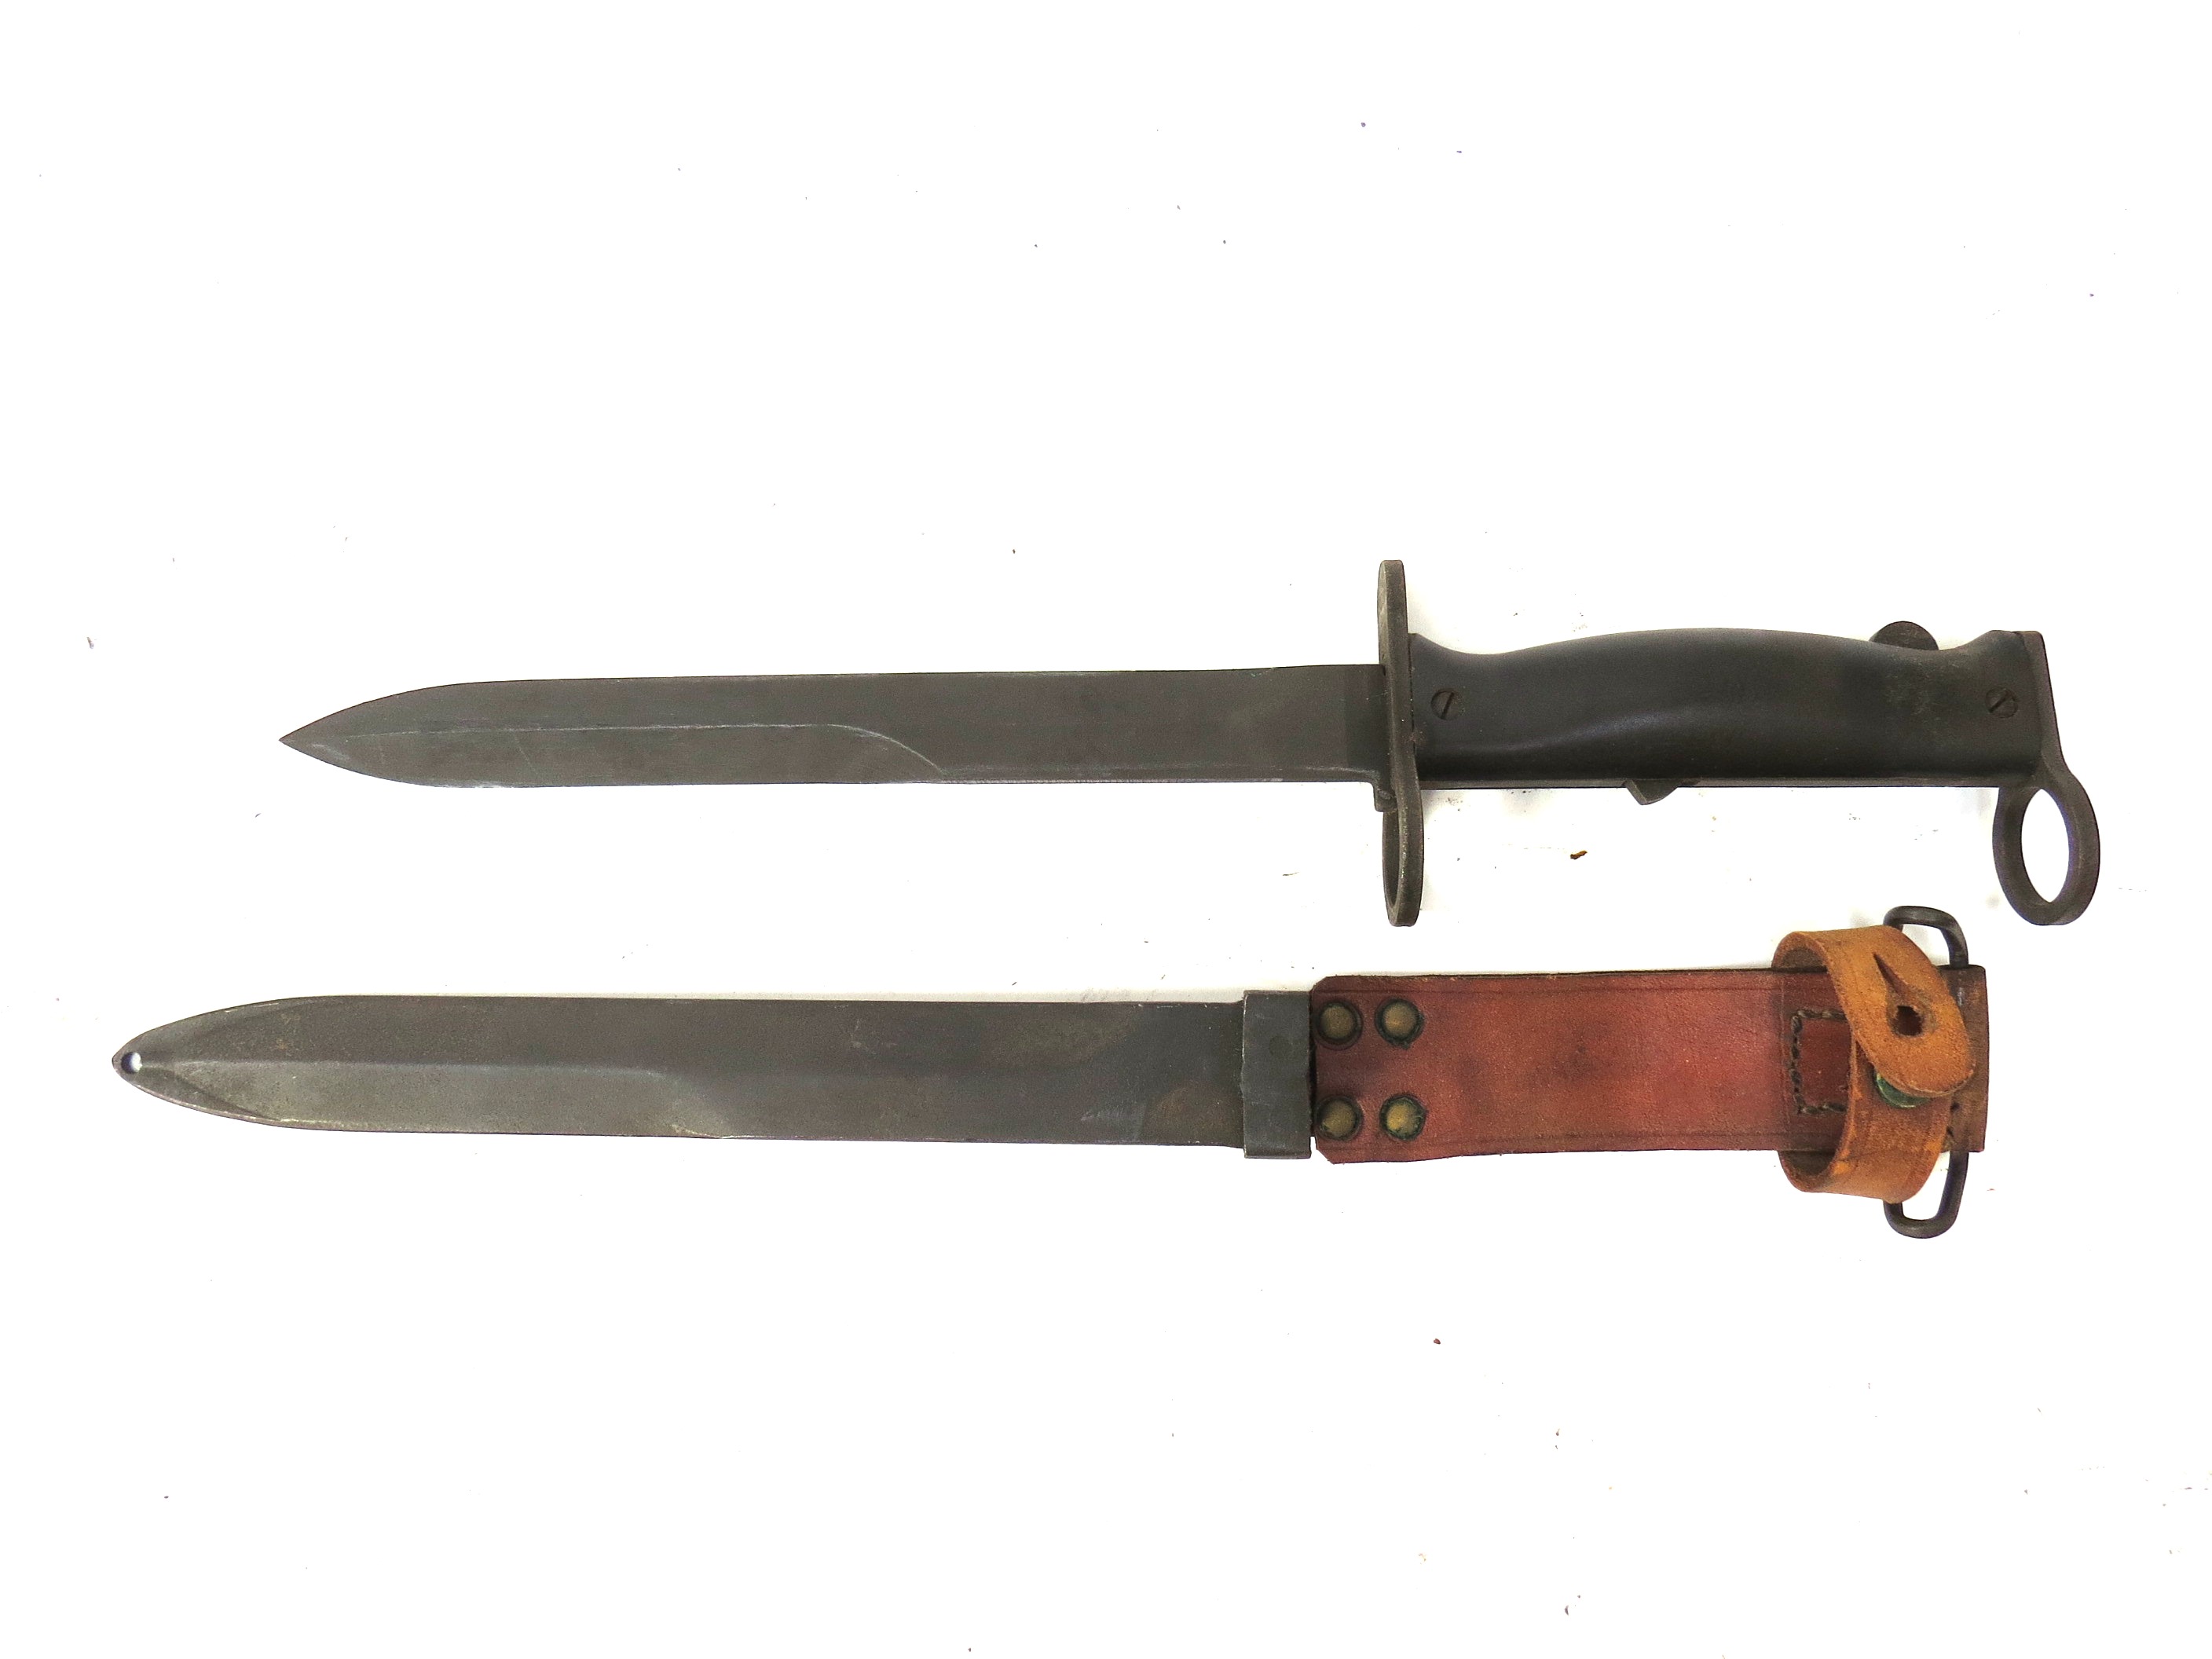 A French MAS 49/56 knife bayonet wtih scabbard and brown leather belt loop